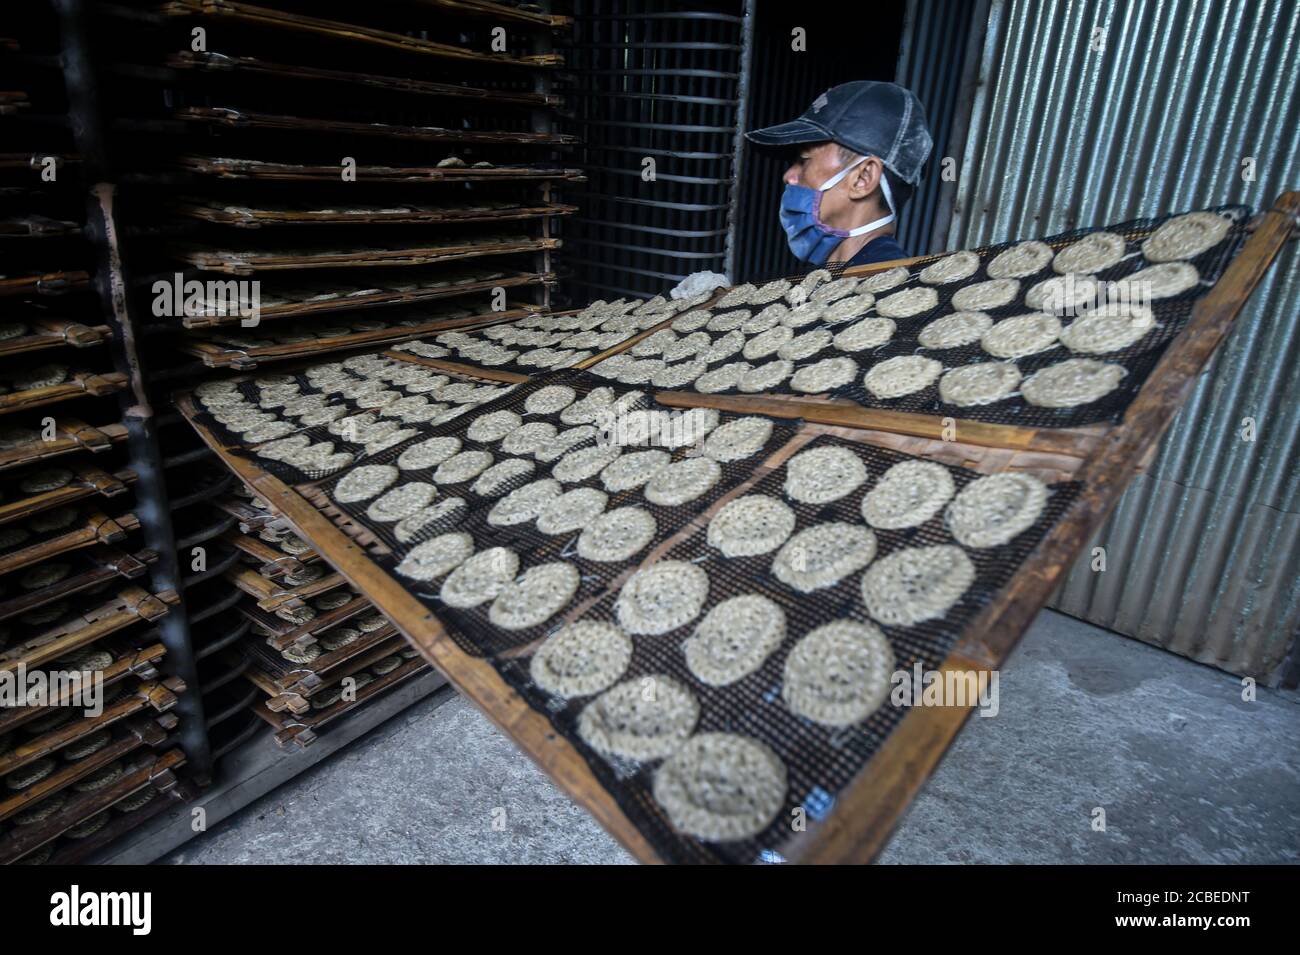 (200813) -- WEST JAVA, Aug. 13, 2020 (Xinhua) -- A worker wearing a face mask holds steamed crackers to be dried in an oven at a cracker factory in Depok, West Java, Indonesia, Aug. 13, 2020. Indonesia will distribute working capital assistance for 9 million small and medium enterprises (SMEs) to help them revive businesses which have been dashed by the novel coronavirus pandemic, a minister said here on Wednesday. ( Xinhua/Agung Kuncahya B.) Stock Photo